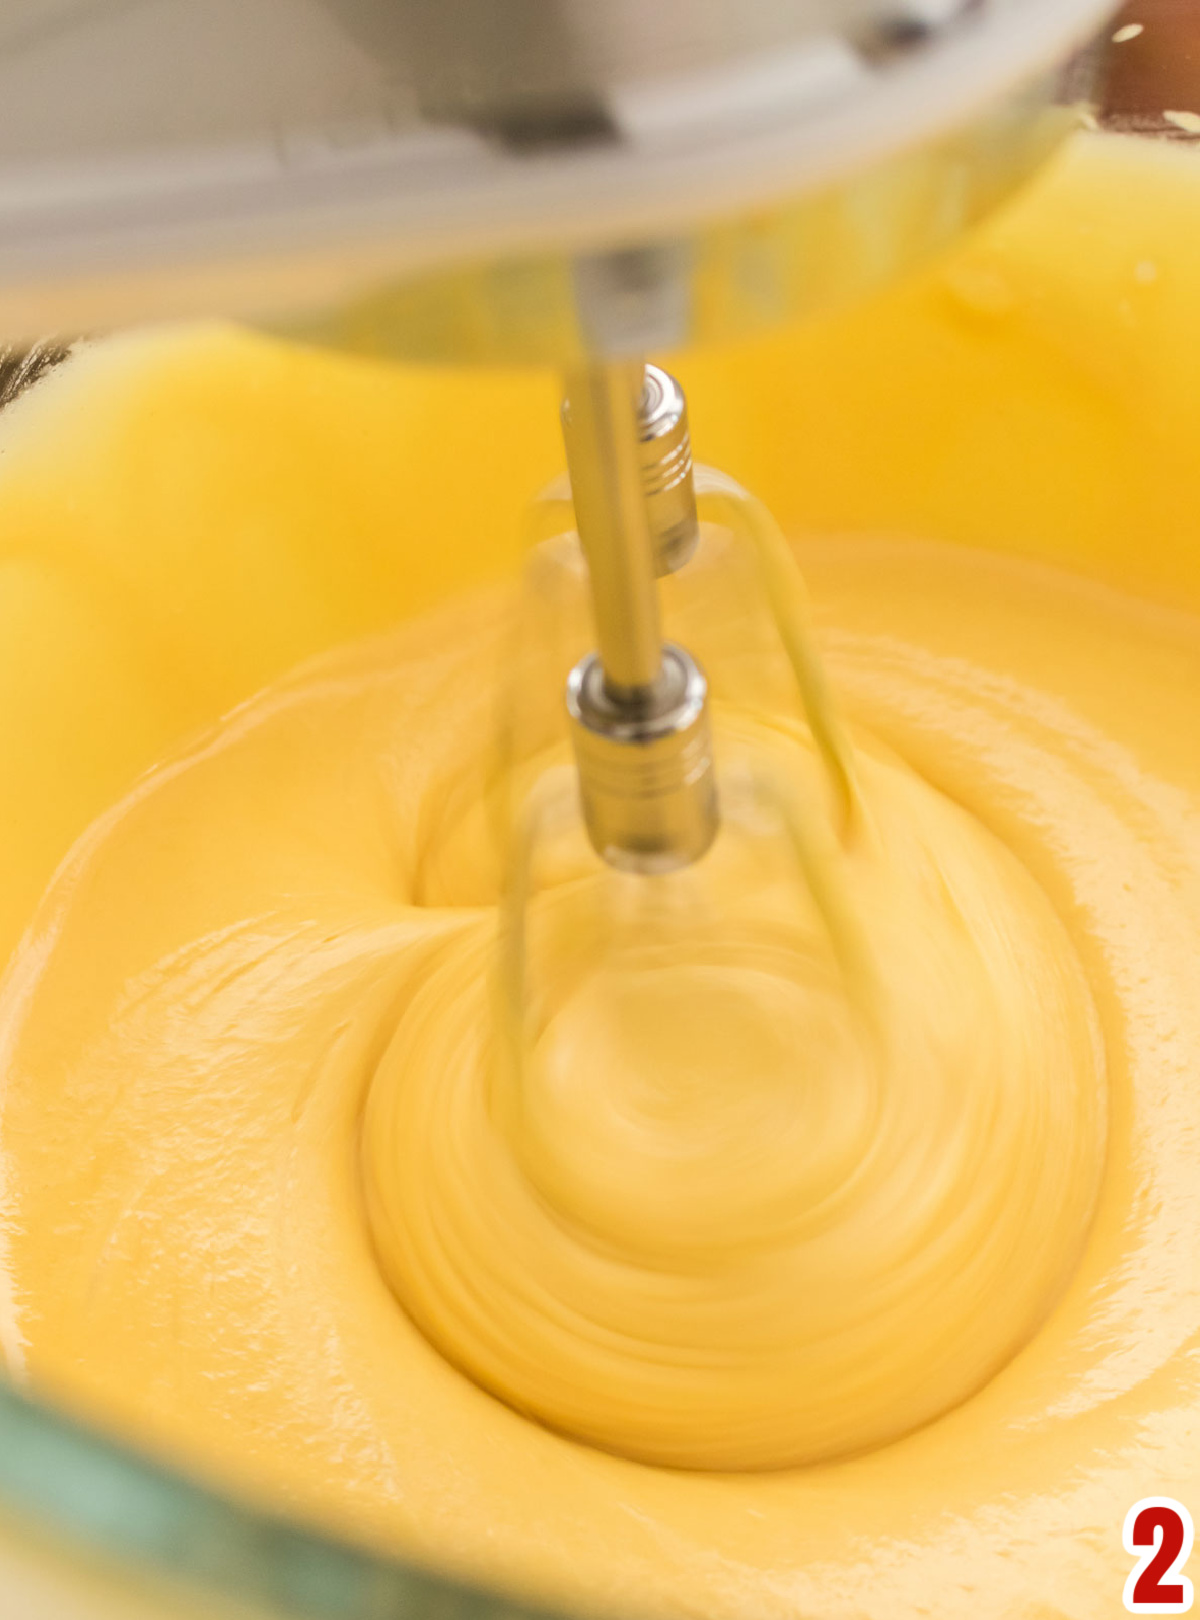 Closeup on glass mixing bowl with cake batter and a hand mixer.